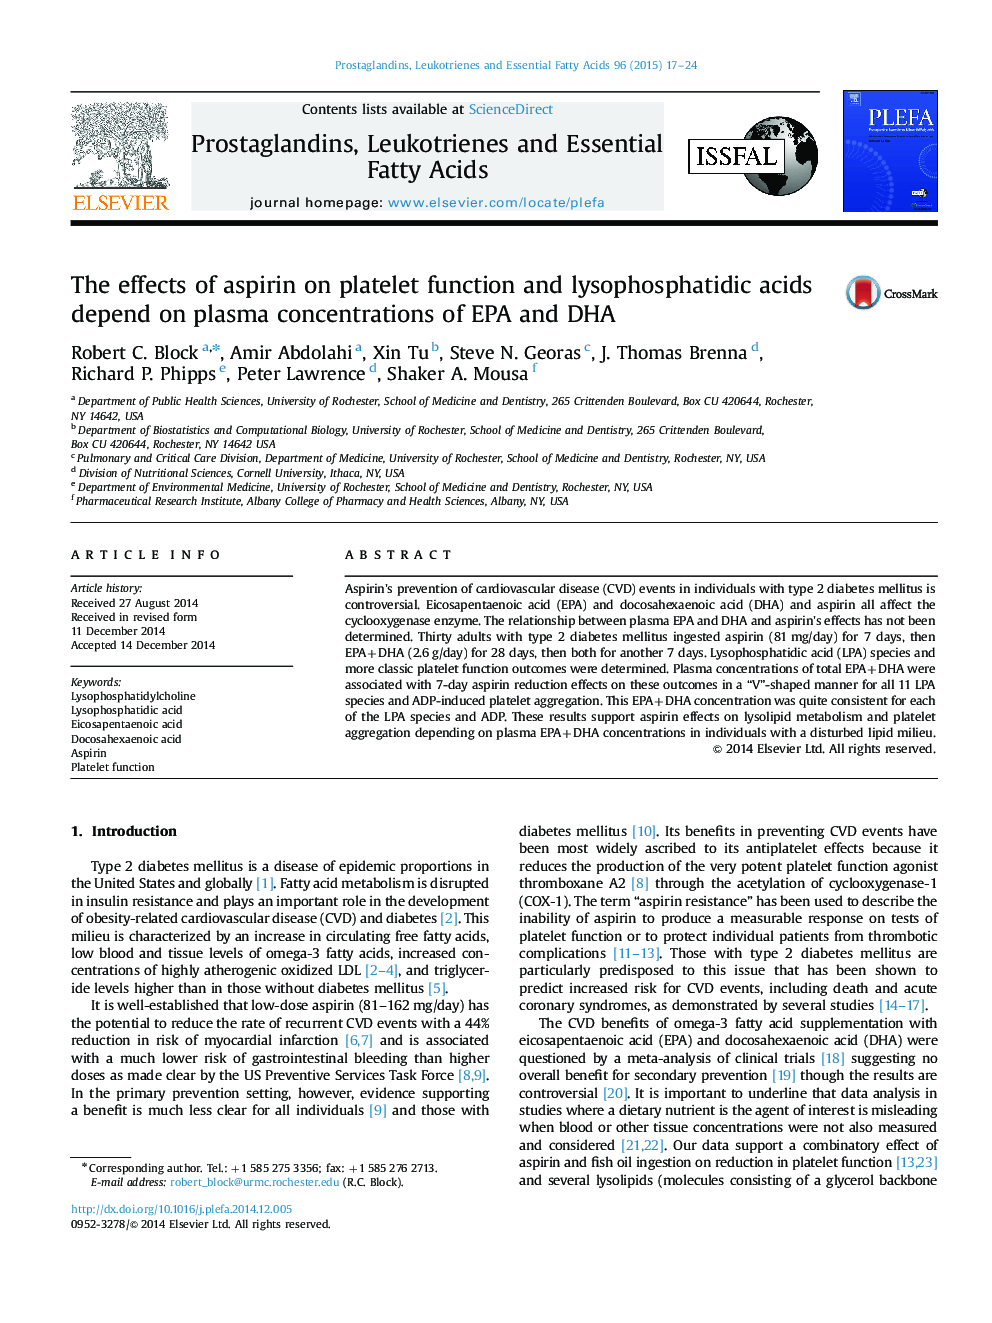 The effects of aspirin on platelet function and lysophosphatidic acids depend on plasma concentrations of EPA and DHA